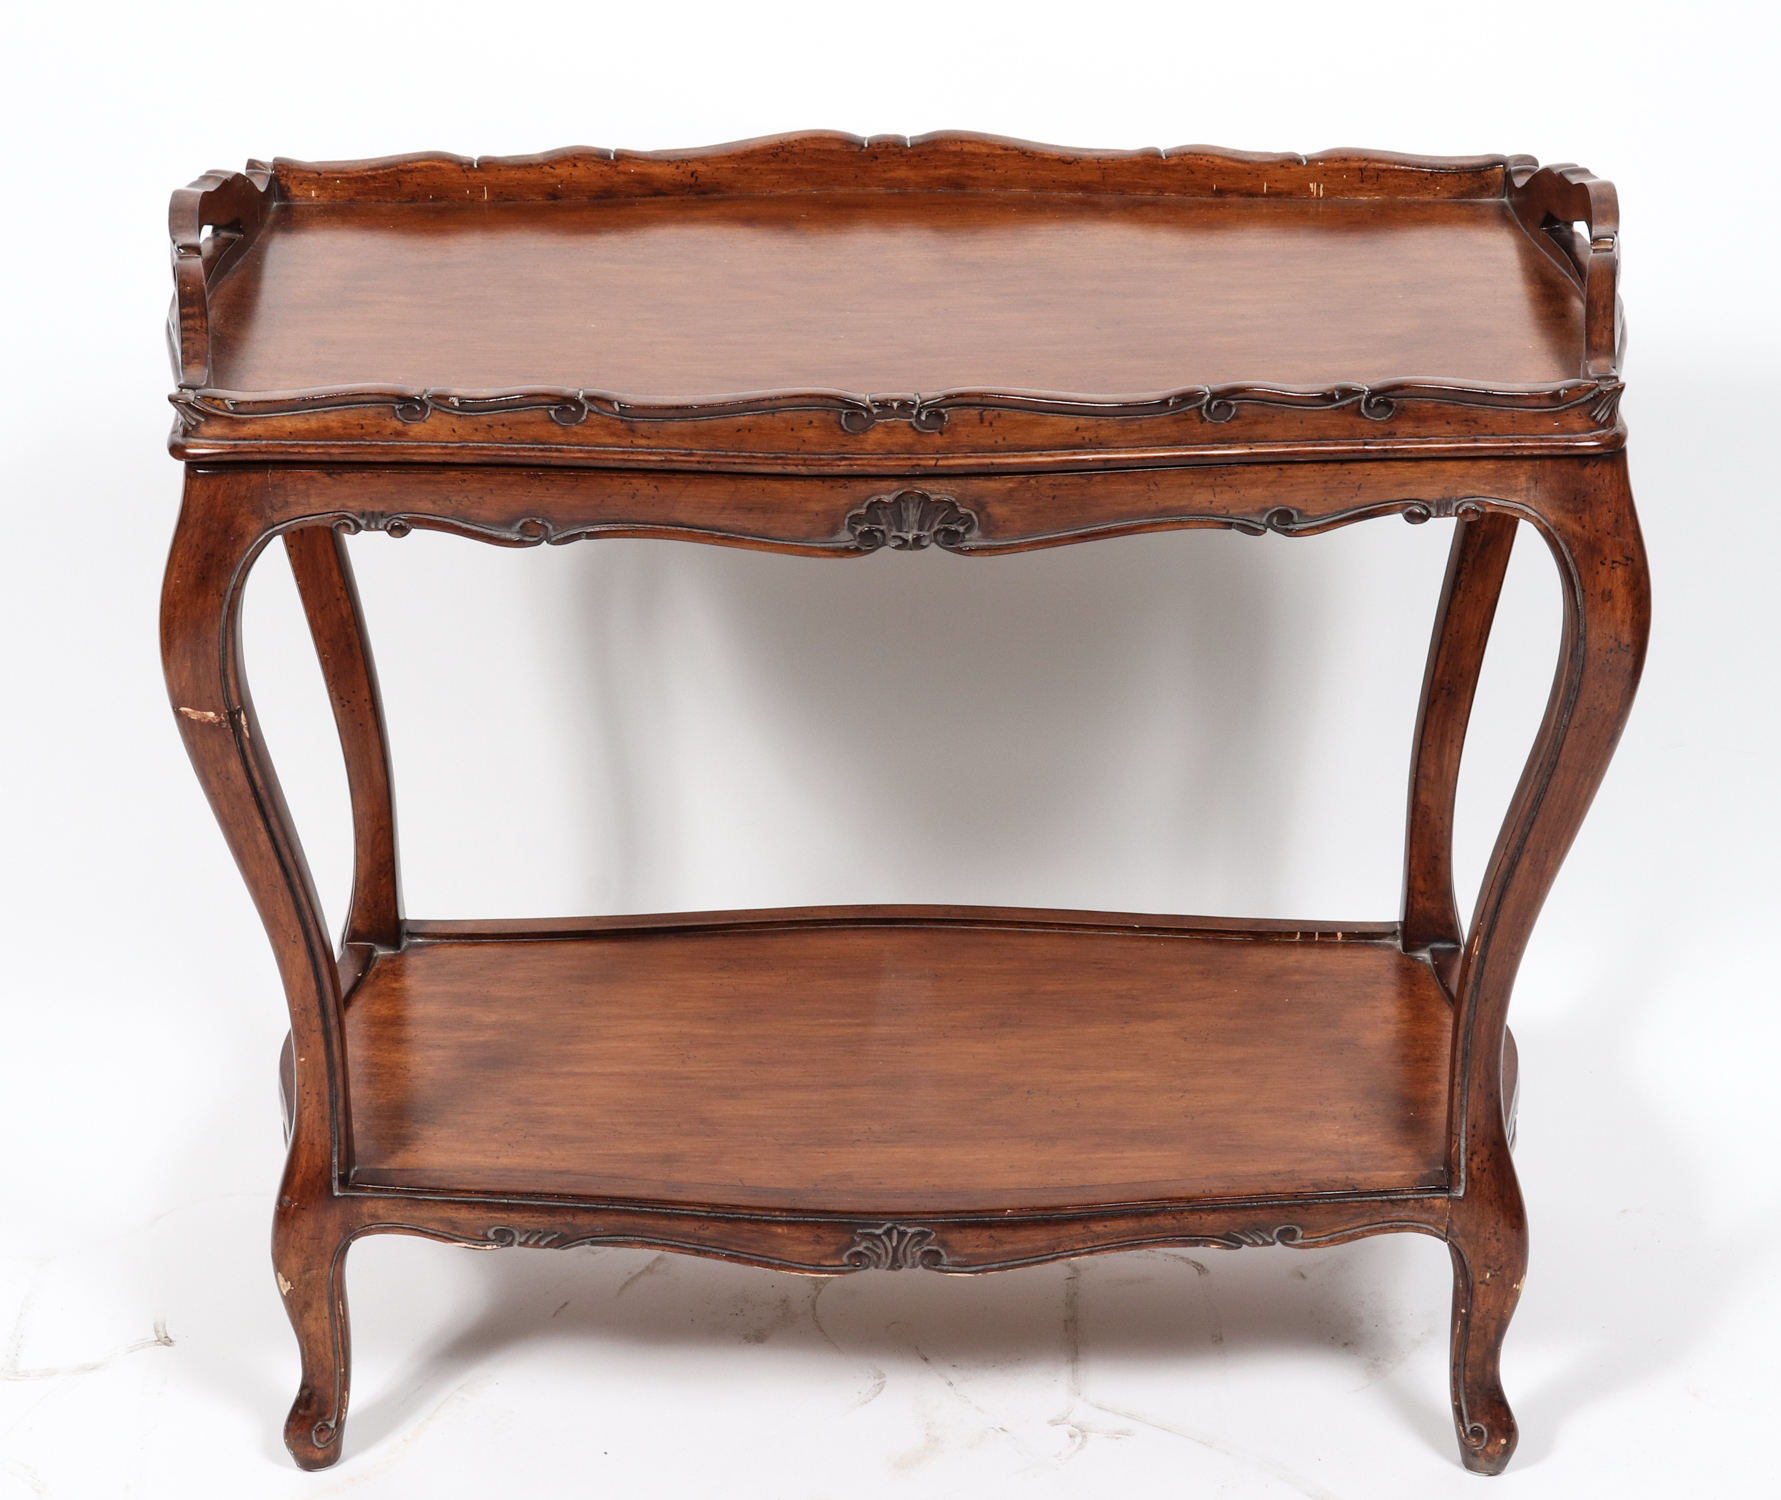 LOUIS XV MANNER TWO TIER TABLE 3c3f61